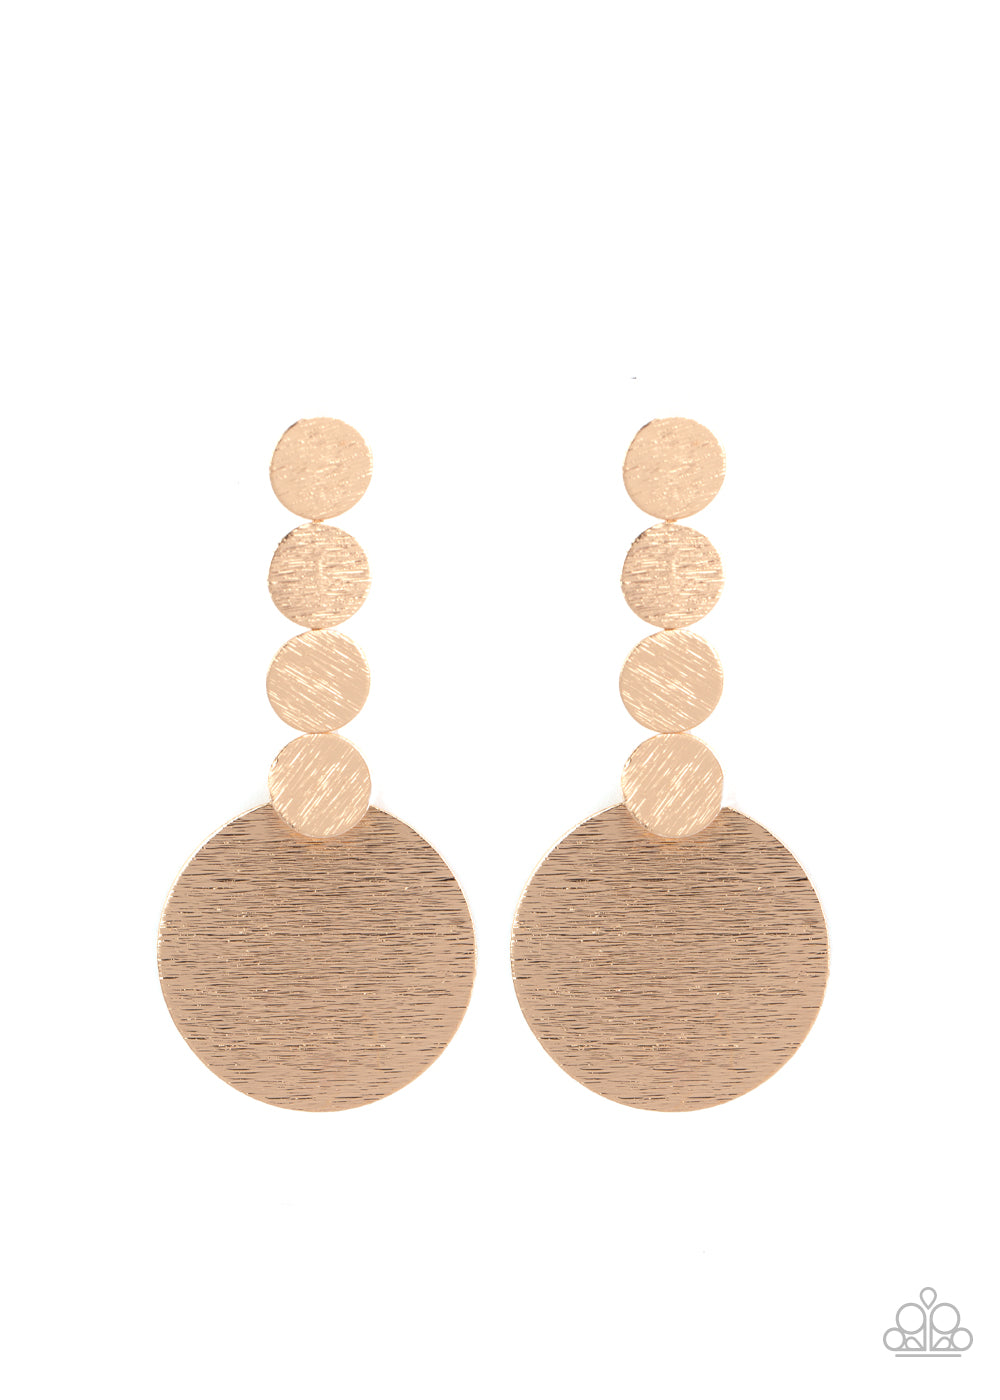 &lt;P&gt;
Featuring a delicately scratched surface, a row of dainty gold discs connects to a large gold disc, creating a bold display. Earring attaches to a standard post fitting.
  &lt;/P&gt;  

&lt;P&gt; &lt;I&gt; Sold as one pair of post earrings.  &lt;/I&gt;  &lt;/P&gt;


&lt;img src=\&quot;https://d9b54x484lq62.cloudfront.net/paparazzi/shopping/images/517_tag150x115_1.png\&quot; alt=\&quot;New Kit\&quot; align=\&quot;middle\&quot; height=\&quot;50\&quot; width=\&quot;50\&quot;/&gt;